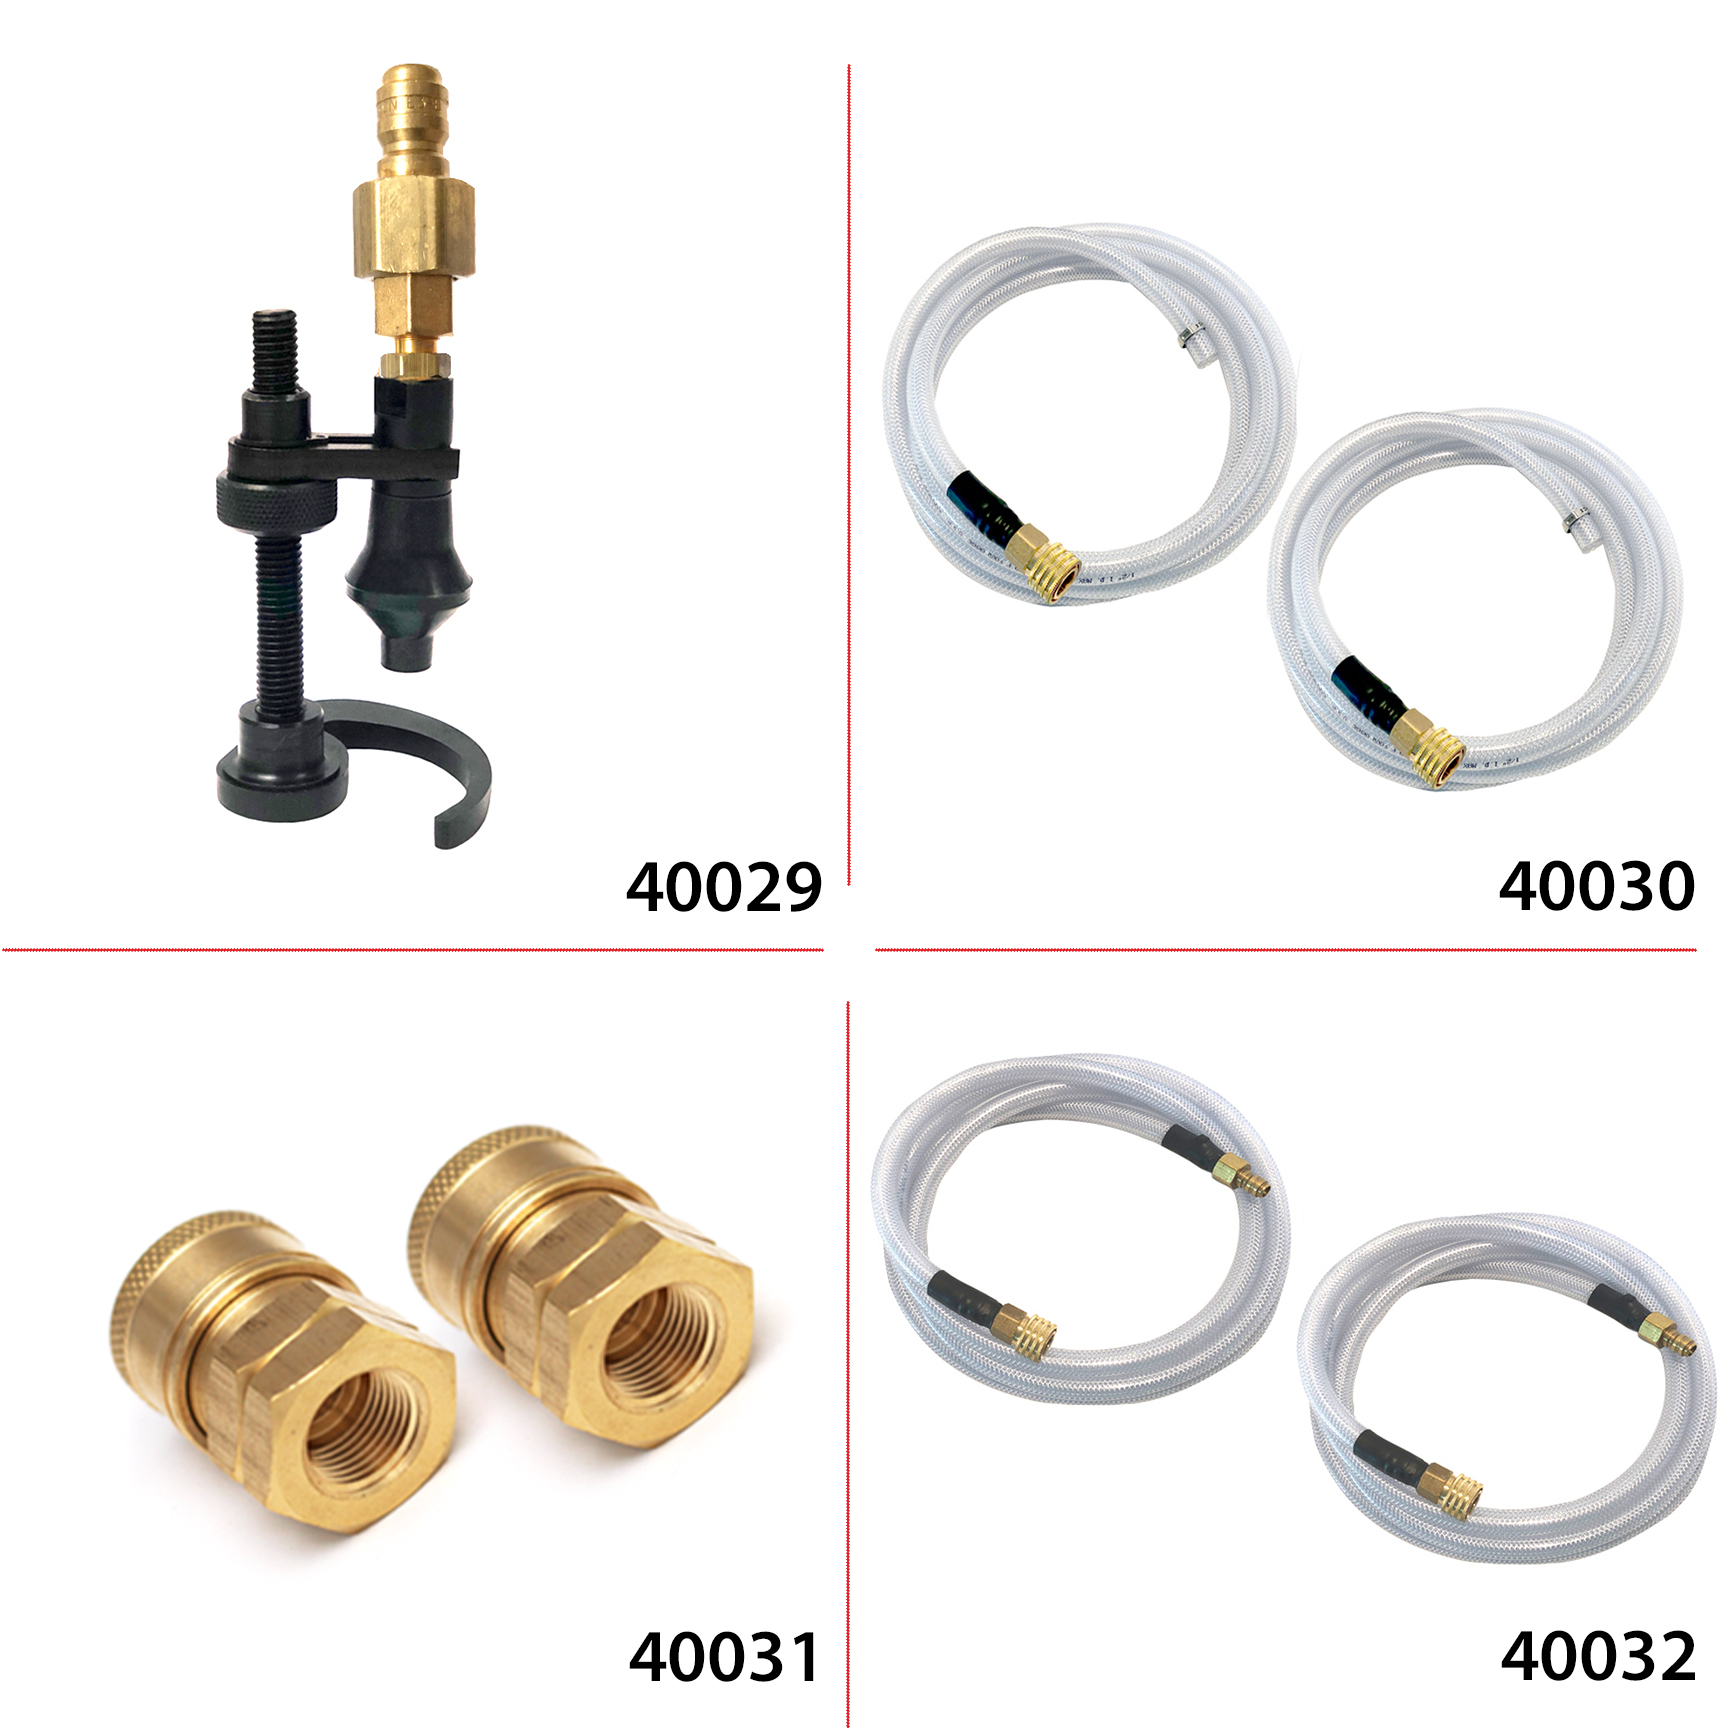 FLUSH ADAPTOR SET and FLUSH MACHINE HOSE AND COUPLER REPLACEMENT SETS 